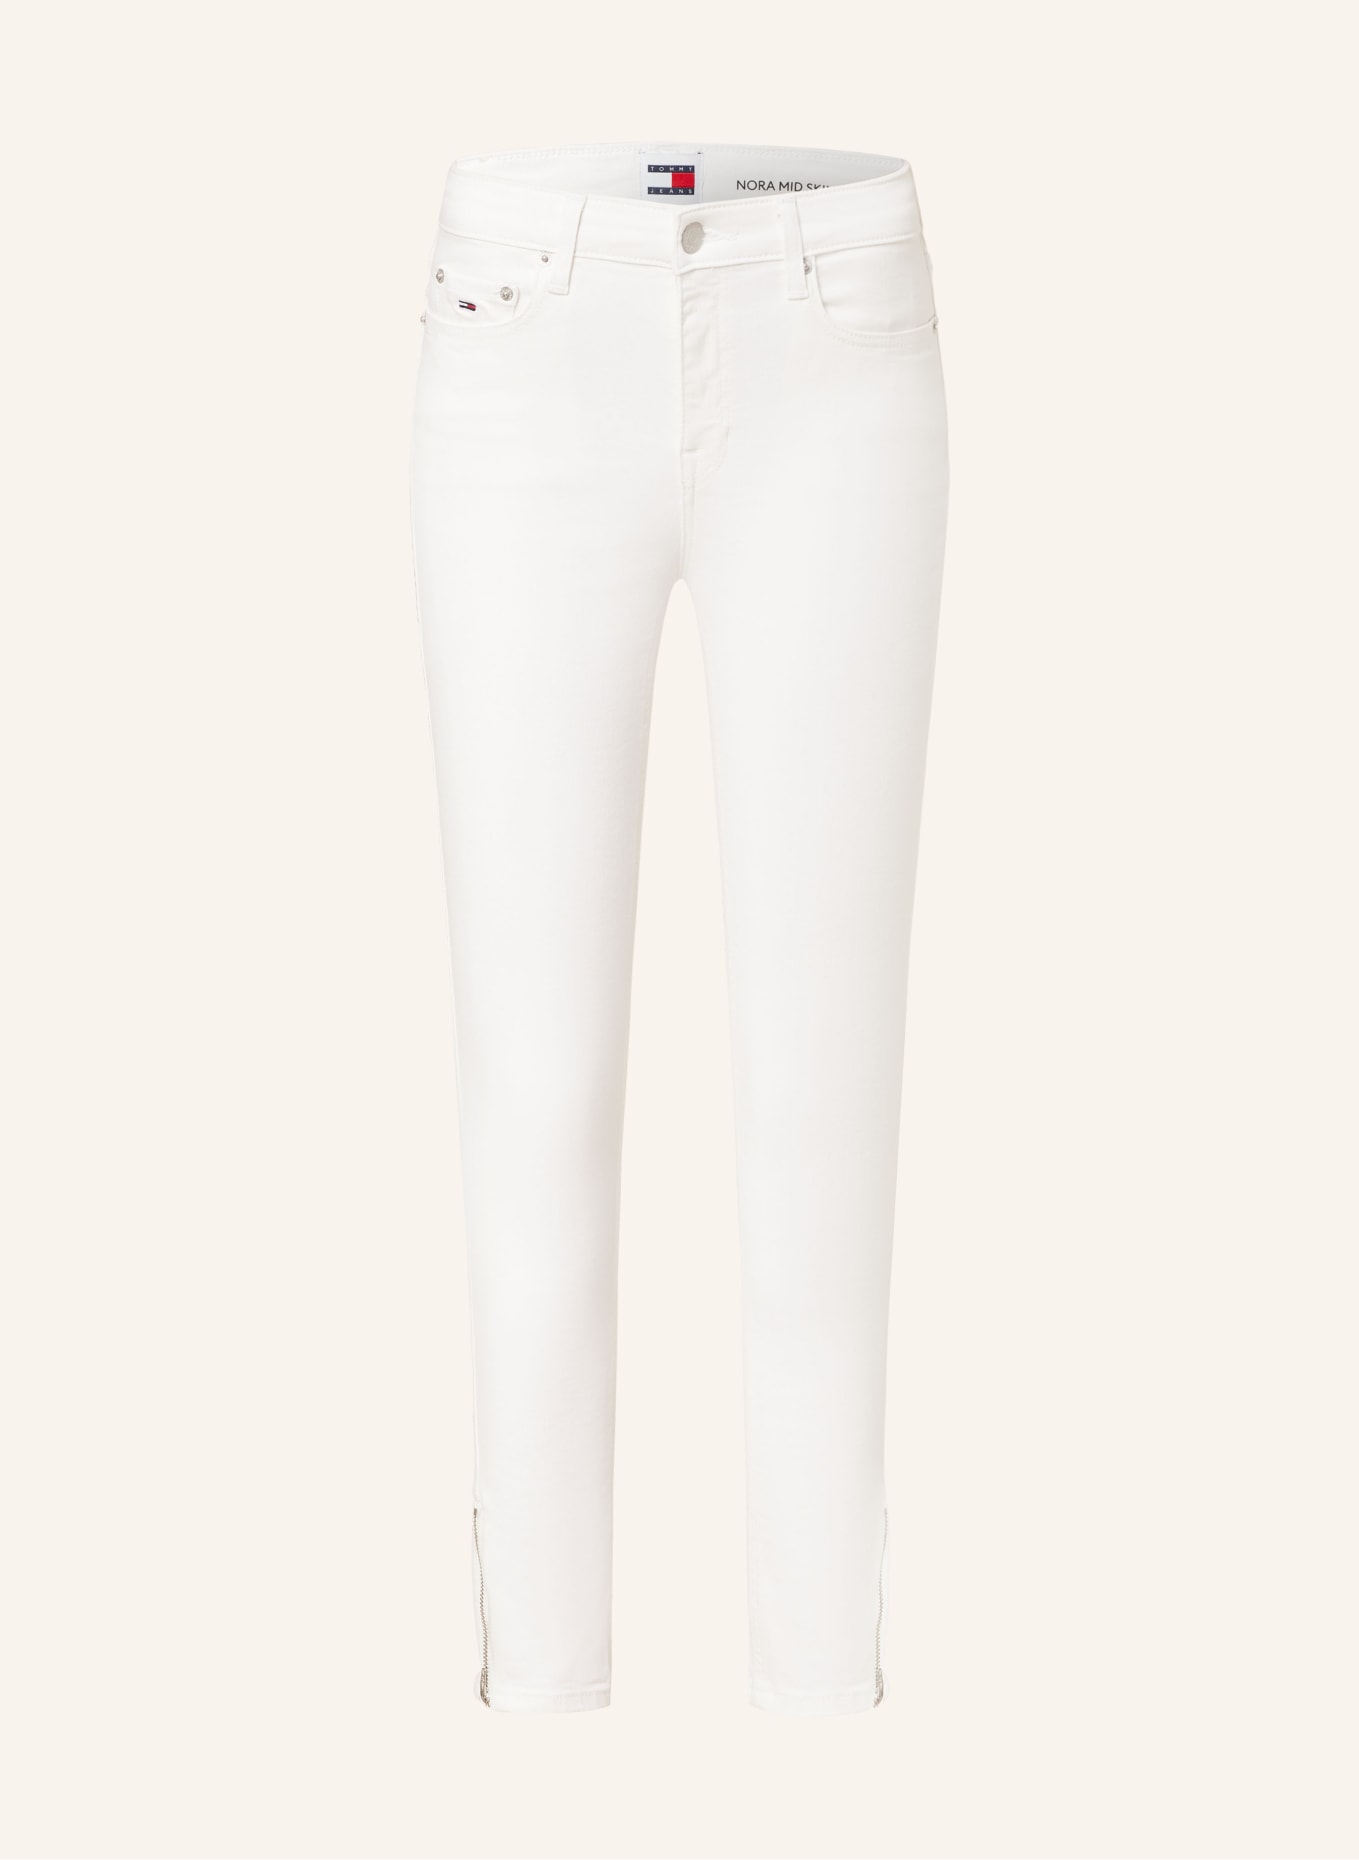 TOMMY JEANS Skinny Jeans NORA, Farbe: WEISS (Bild 1)